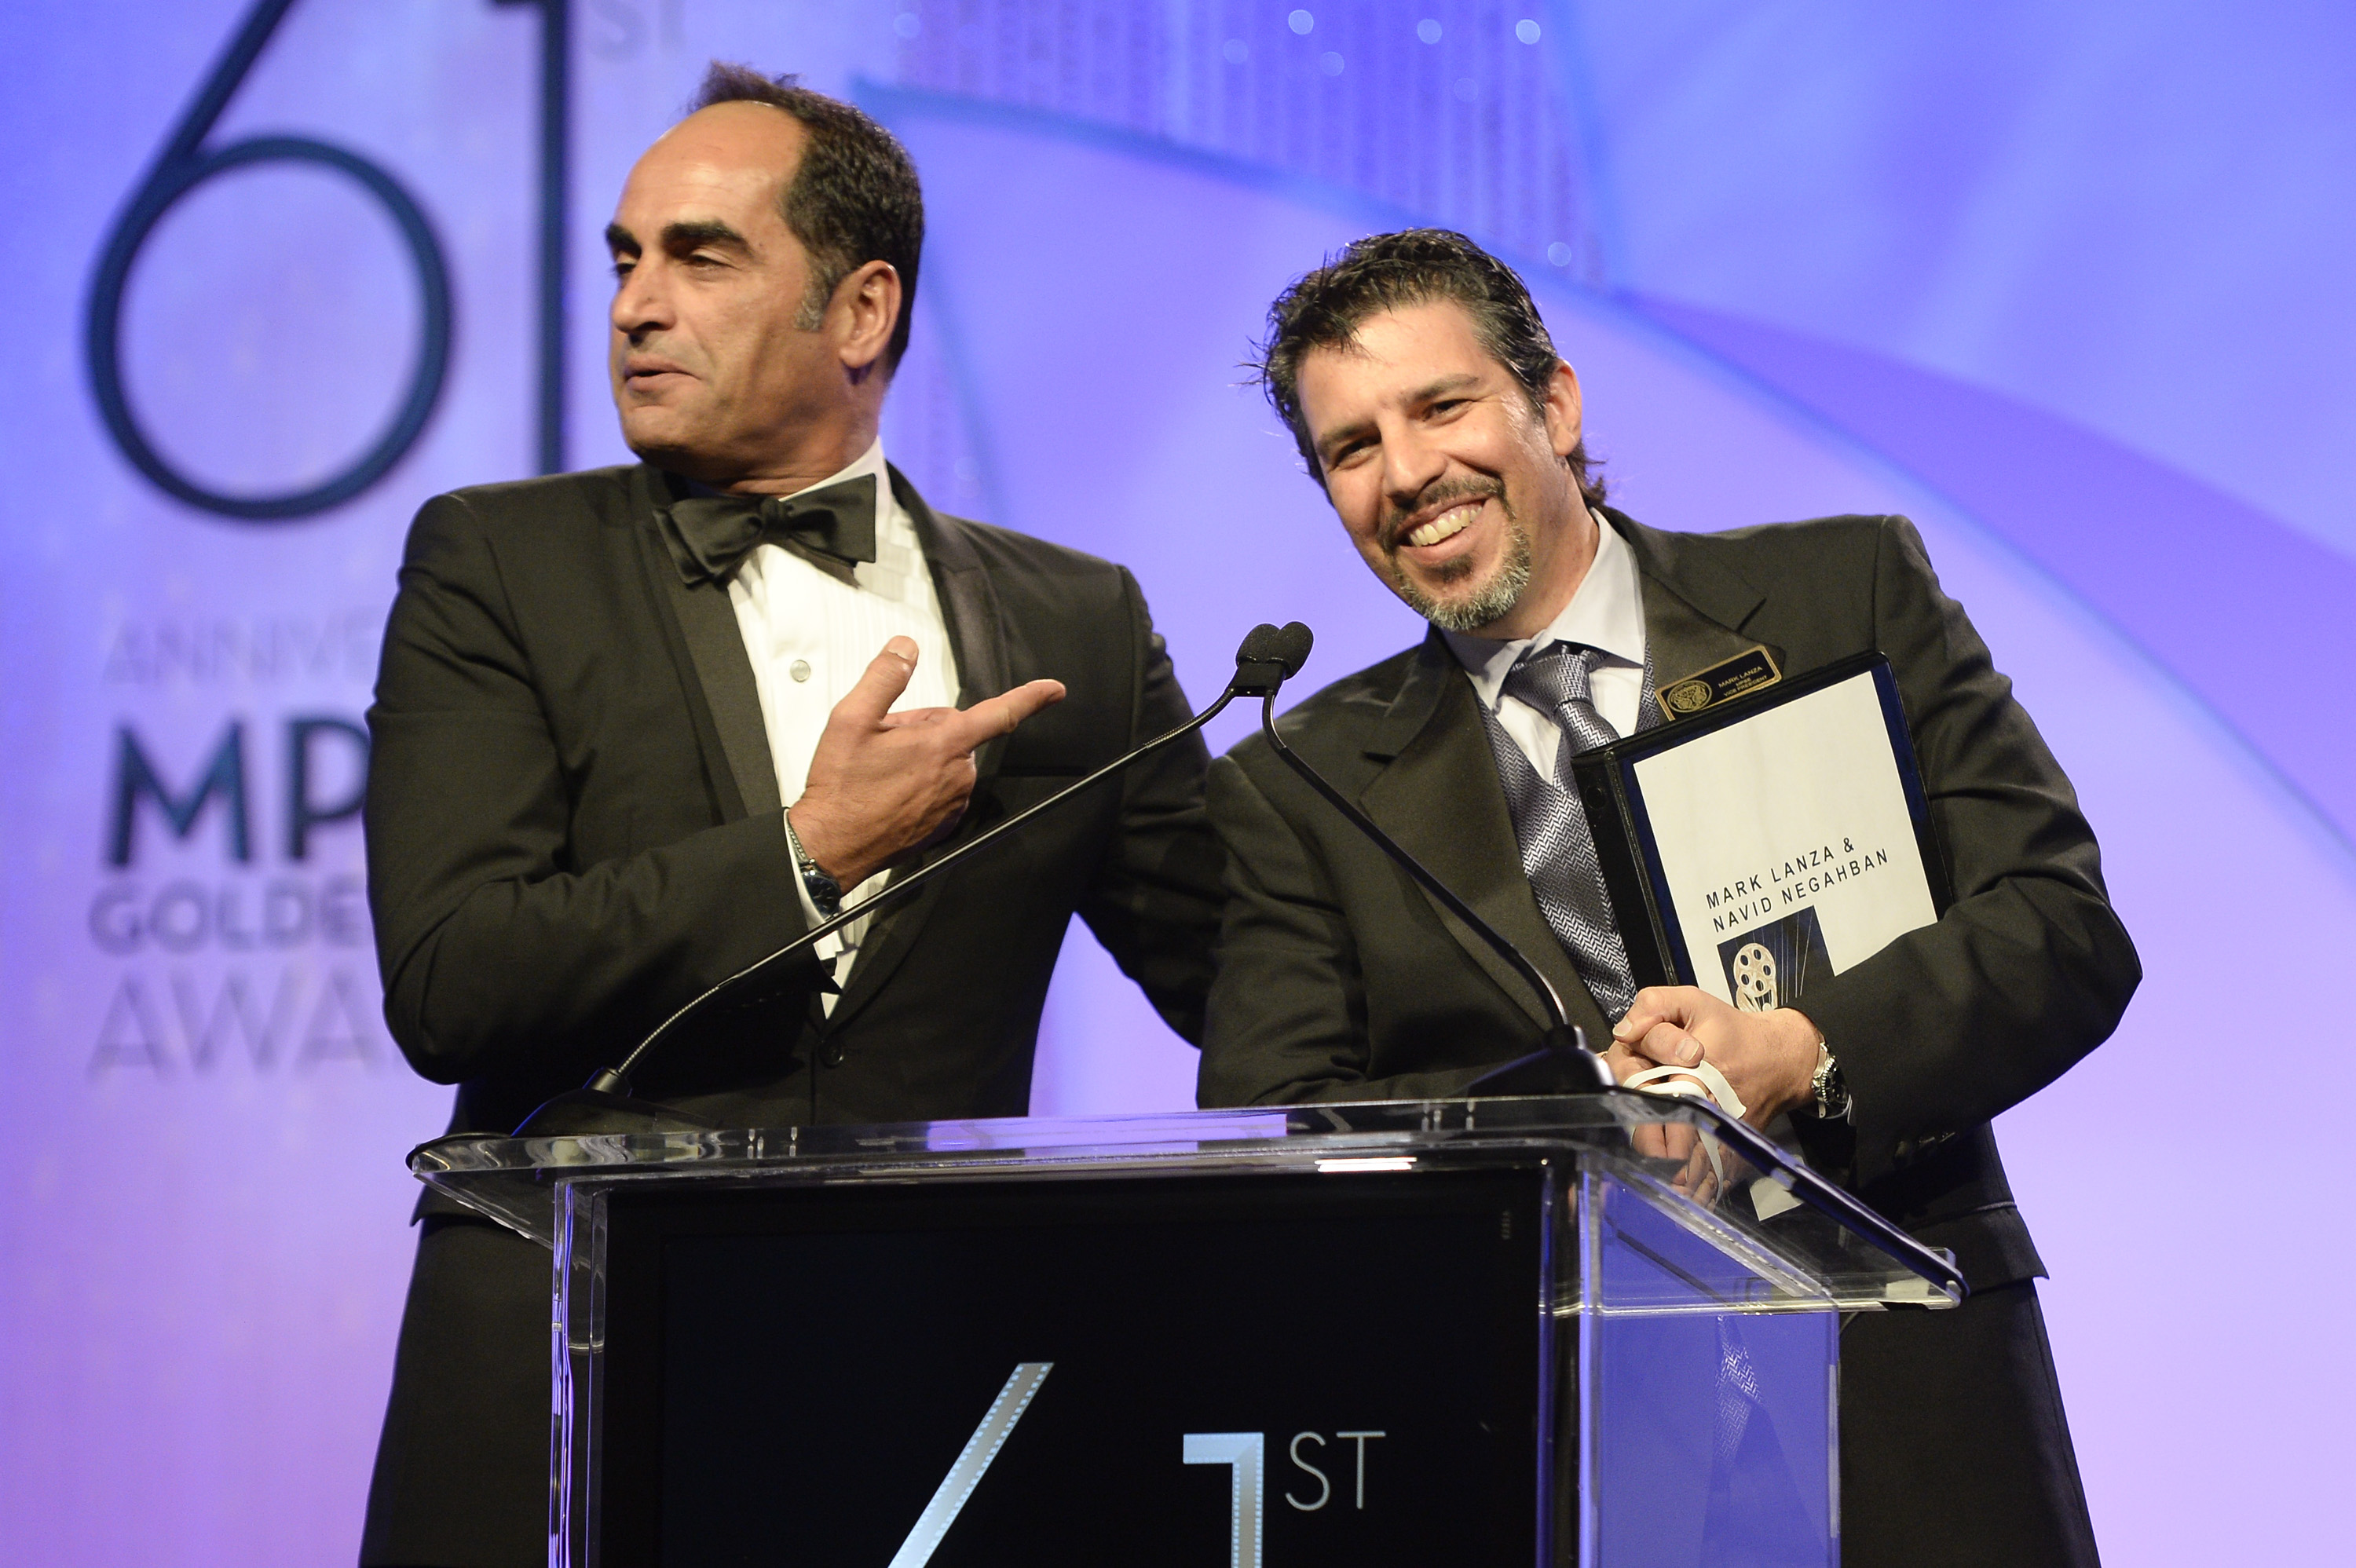 Navid Negahban (Homeland's infamous Abu Nazir) interrogates Mark Lanza at the 2013 Motion Picture Sound Editor Awards.